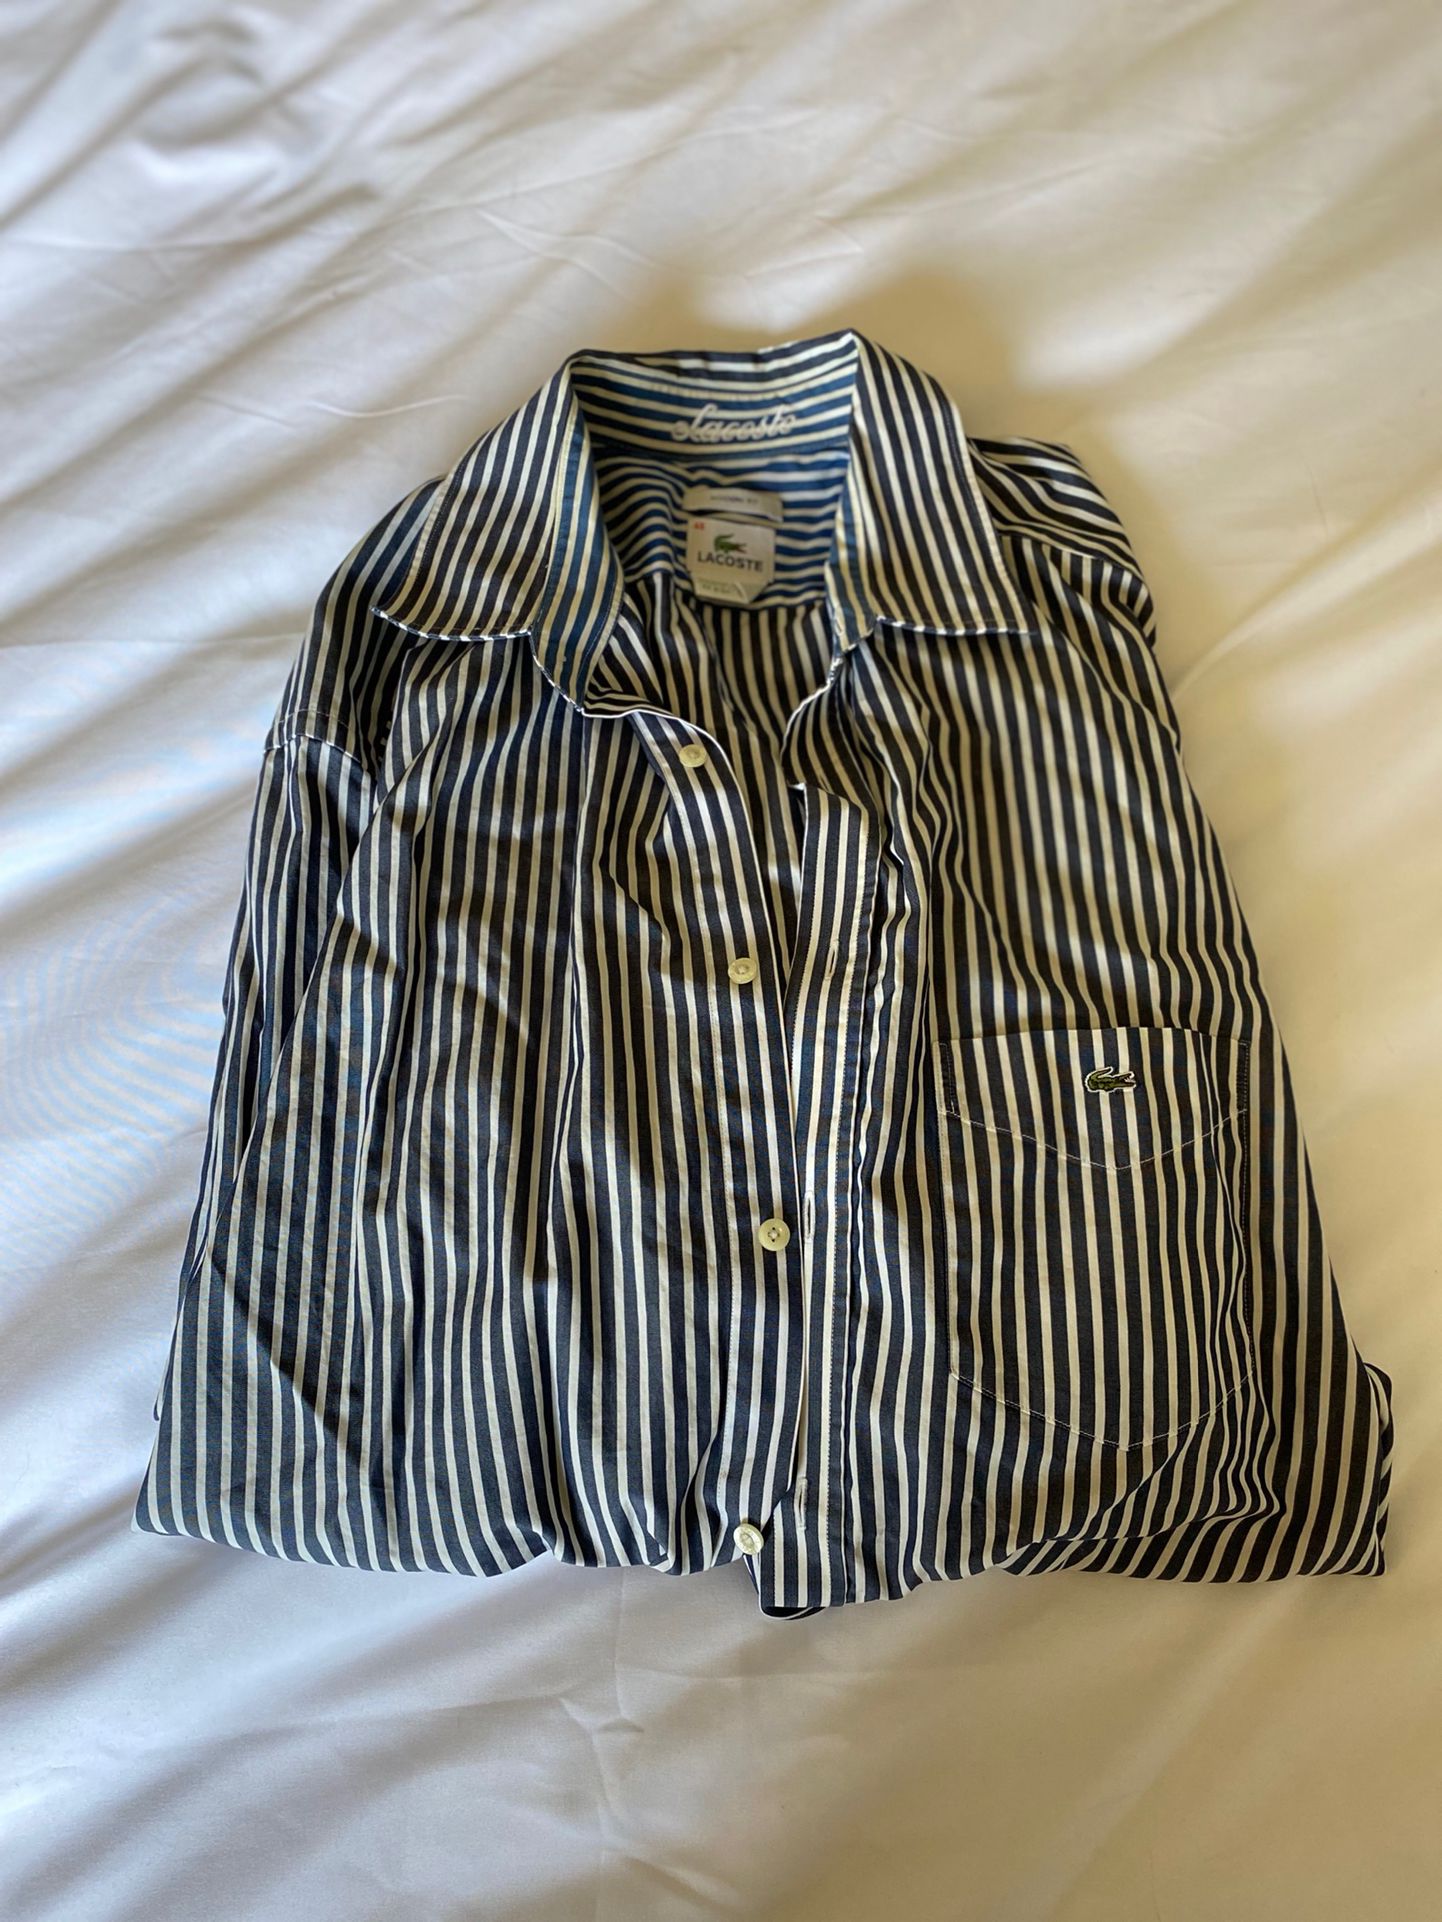 Mens Lacoste Up Striped Shirt Size 46 for Sale San Francisco, CA - OfferUp